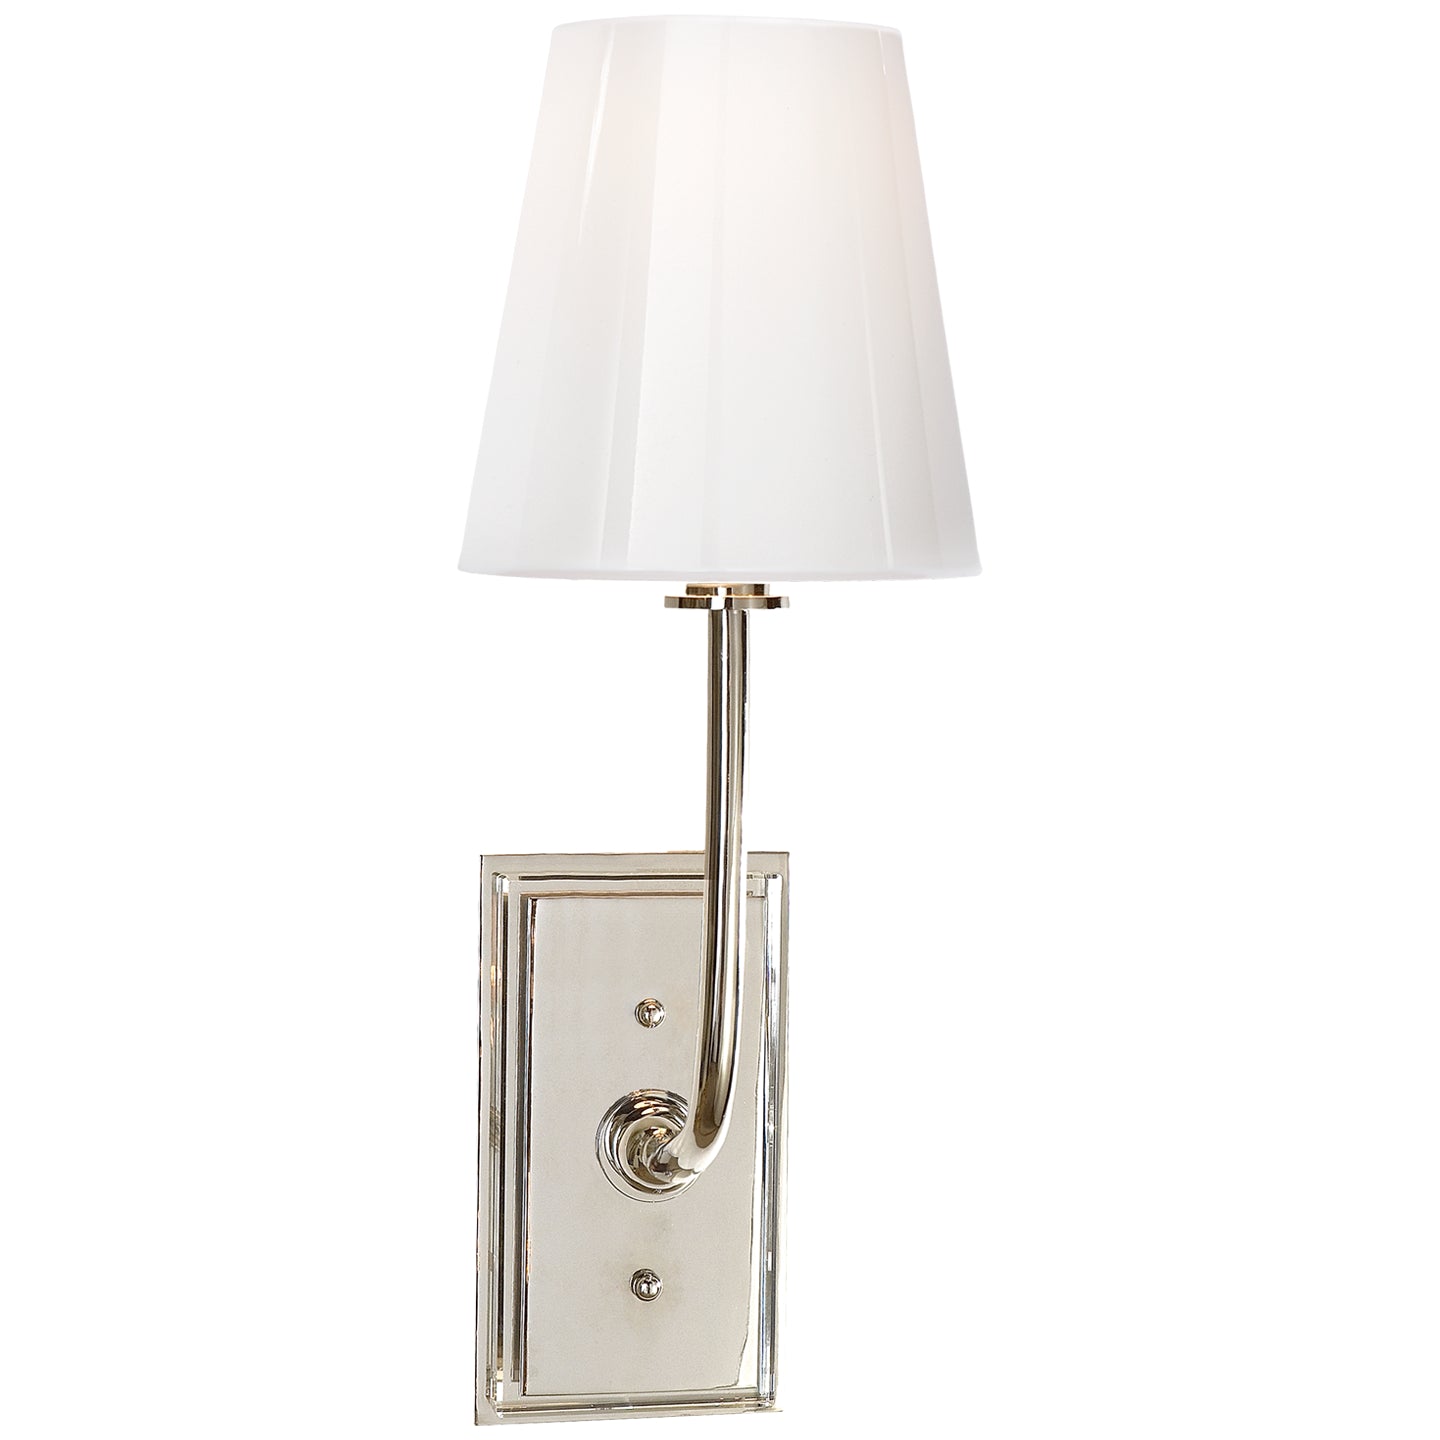 Load image into Gallery viewer, Visual Comfort Signature - TOB 2190PN-WG - One Light Wall Sconce - Hulton - Polished Nickel
